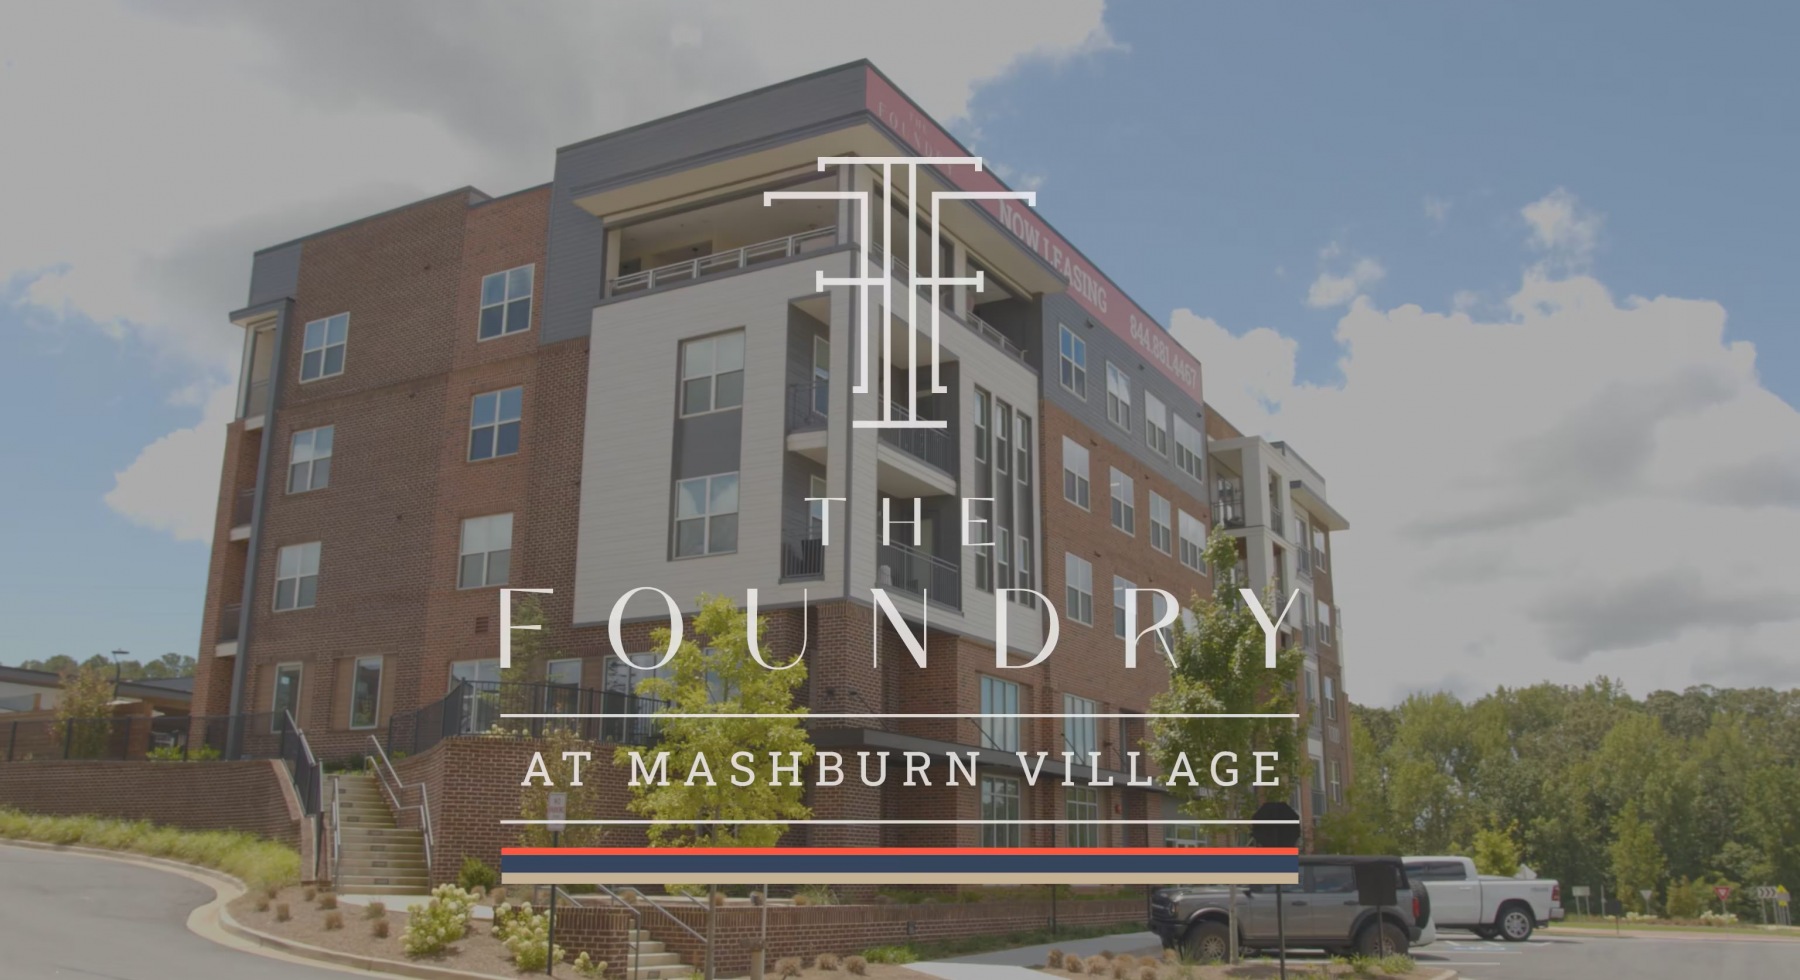 The Foundry at Mashburn Village Welcome Video